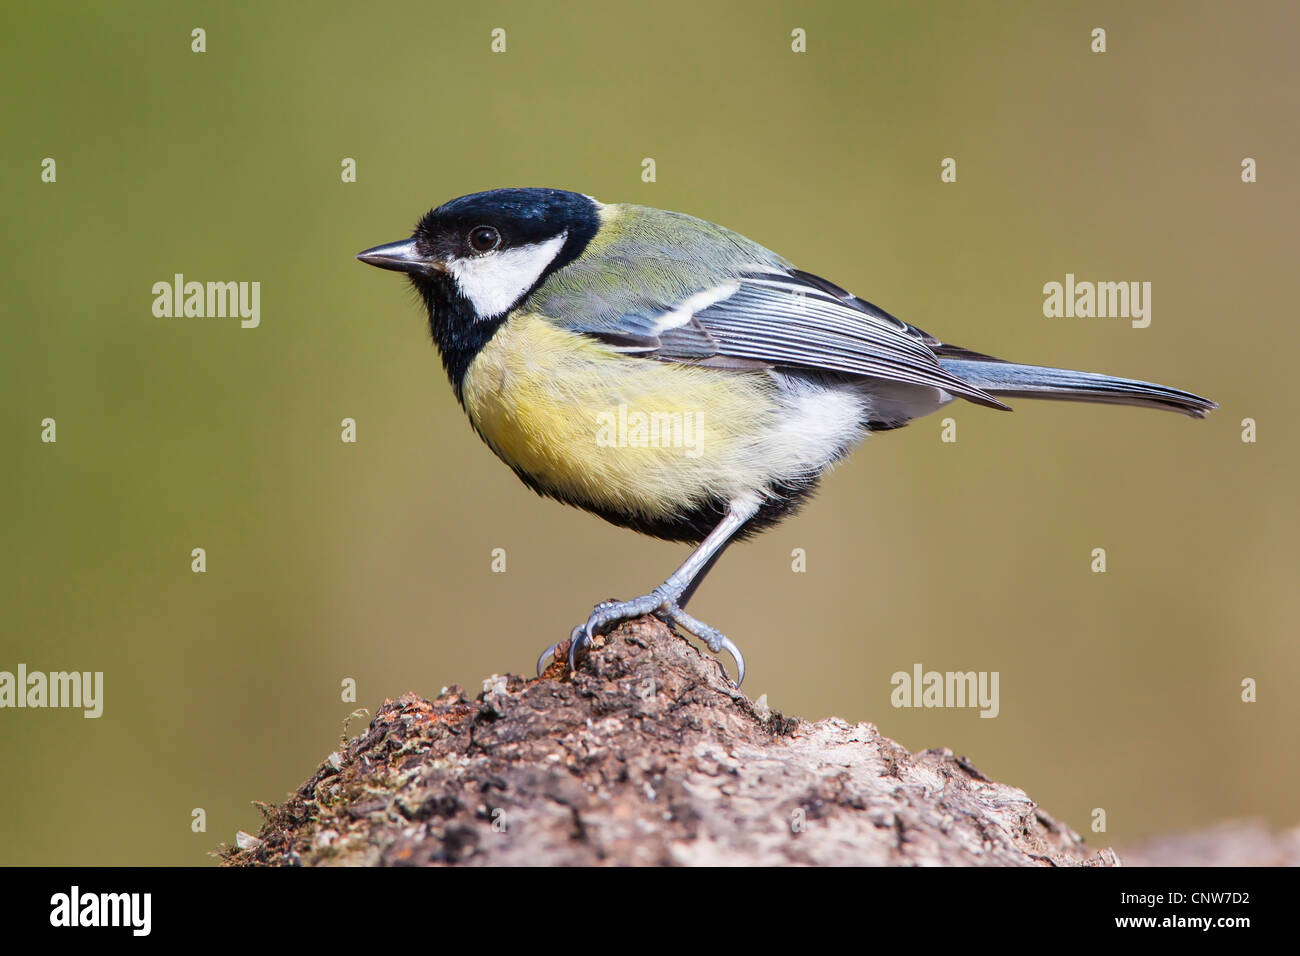 GREAT TIT STANDING ON A LOG Stock Photo